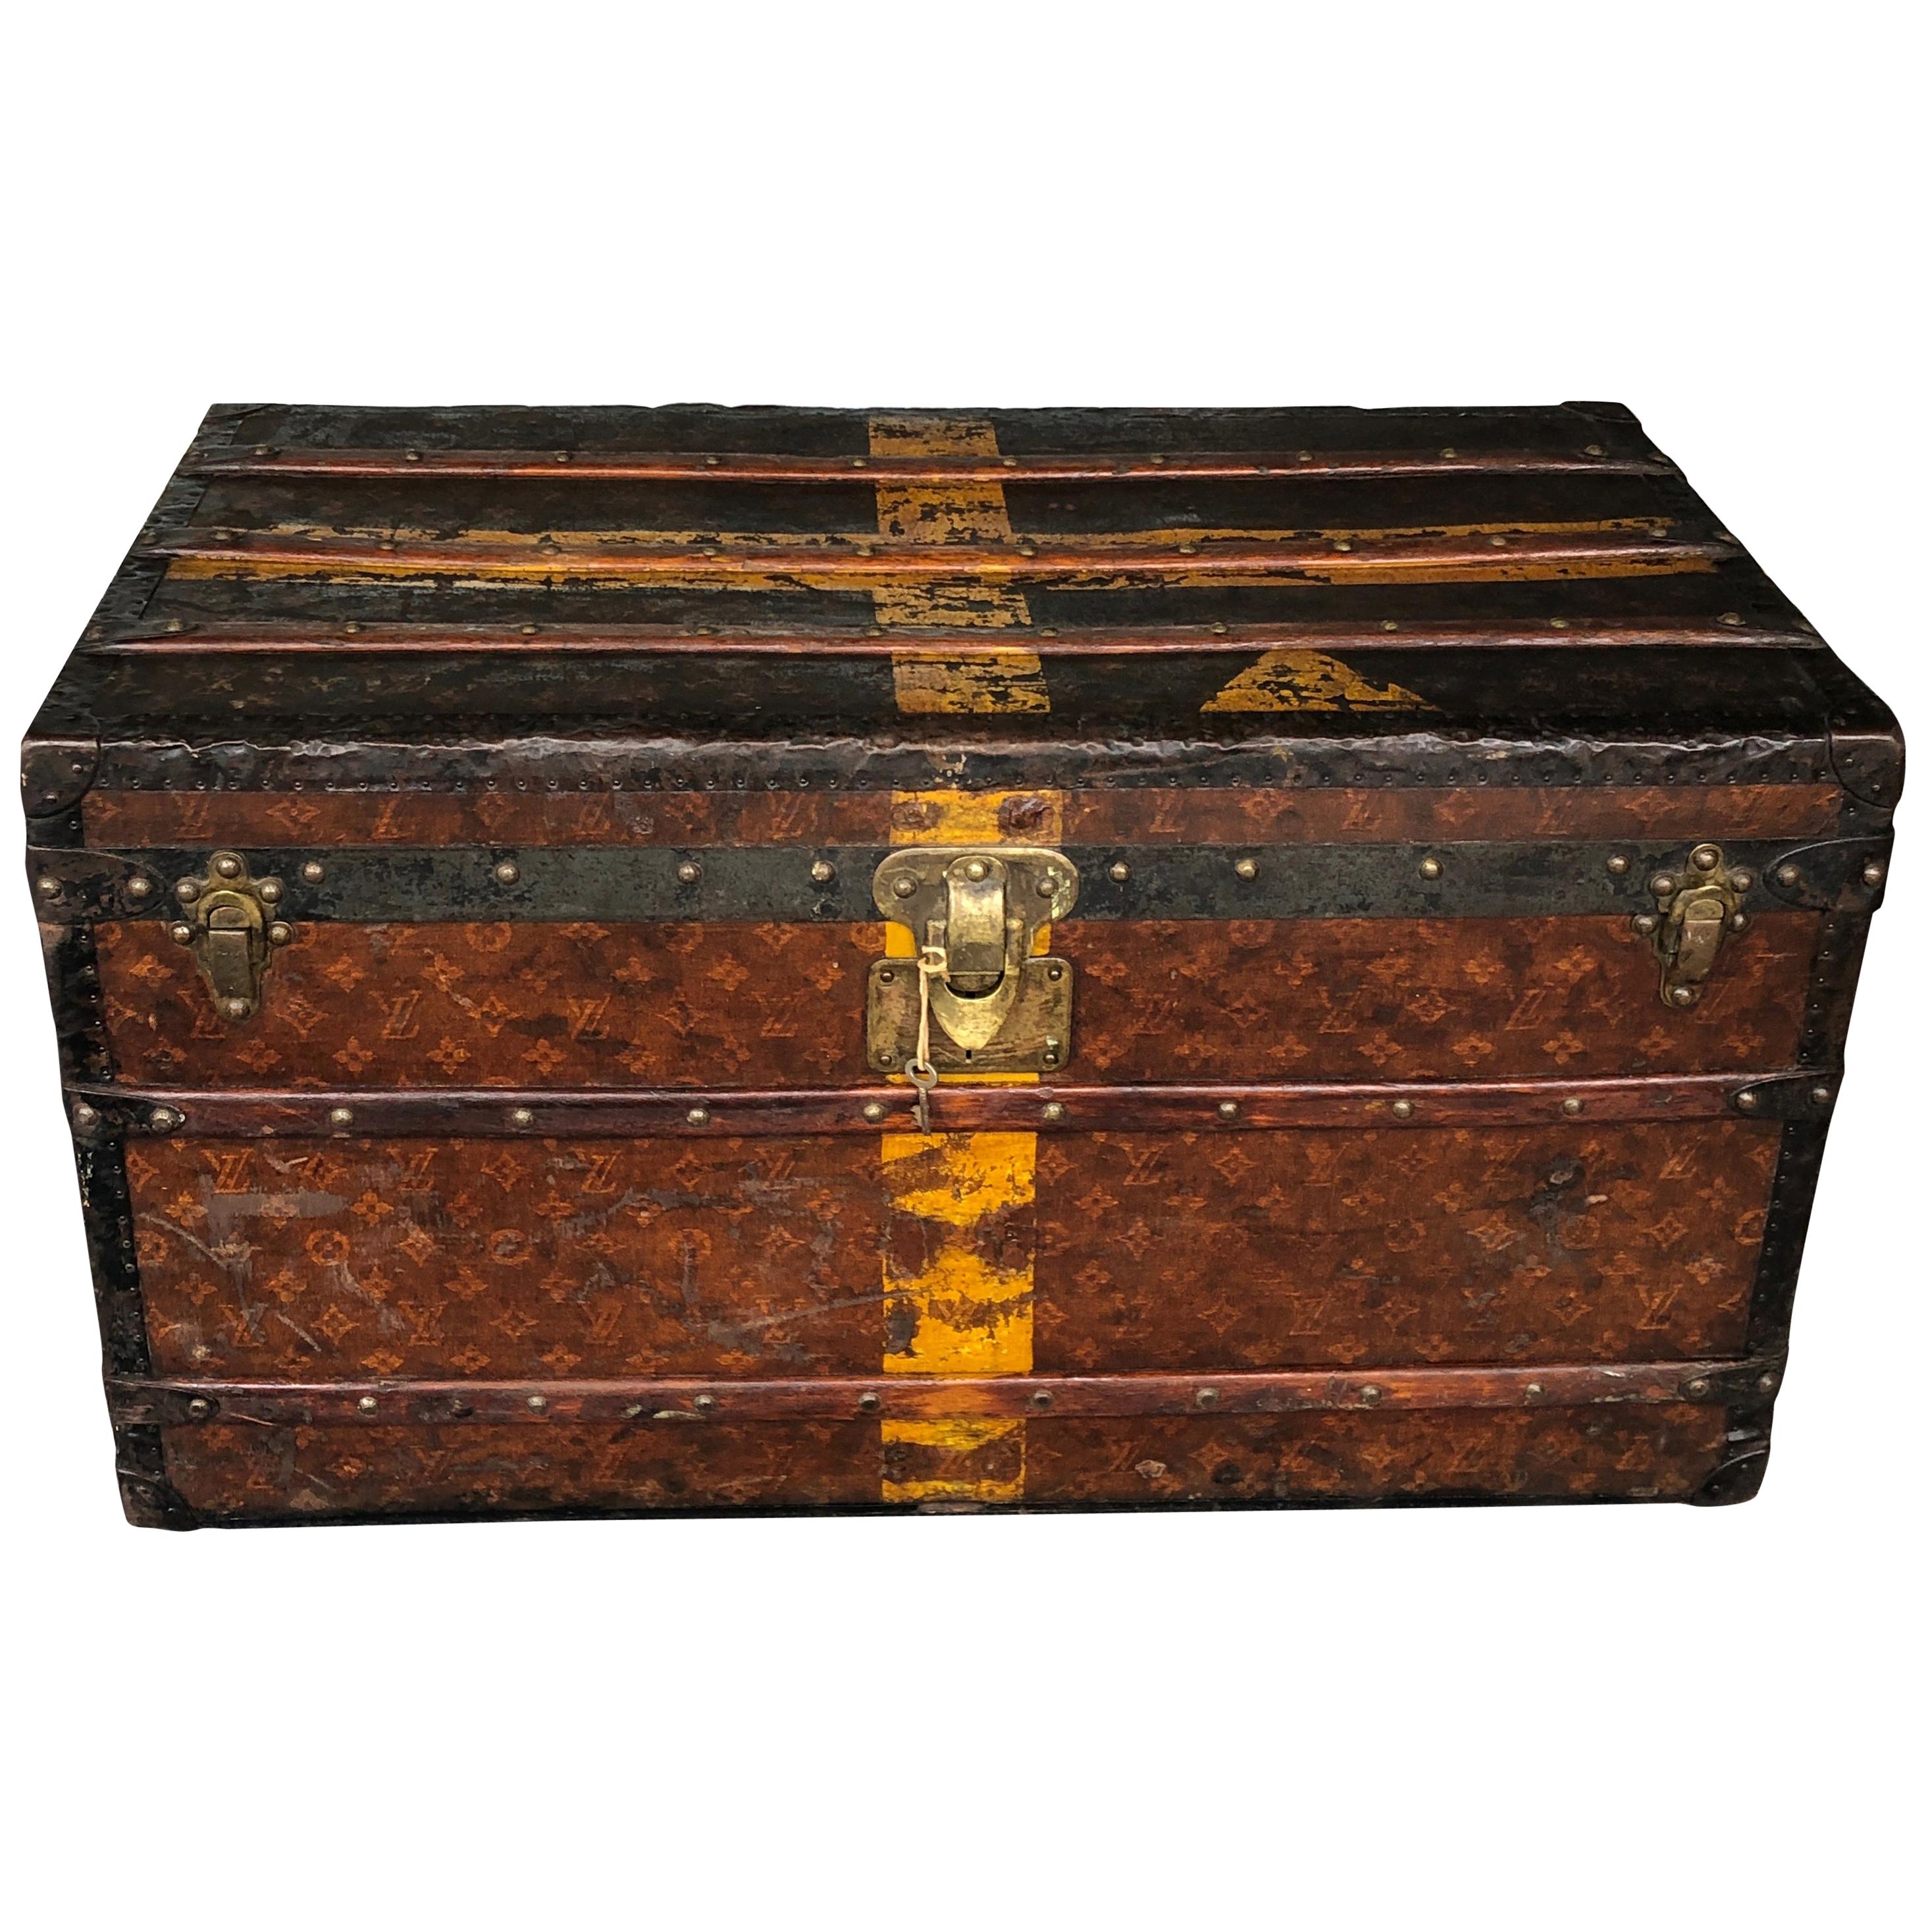 Louis Vuitton Steamer Trunk Monogram Canvas with 3 Insert Trays Early 20th C